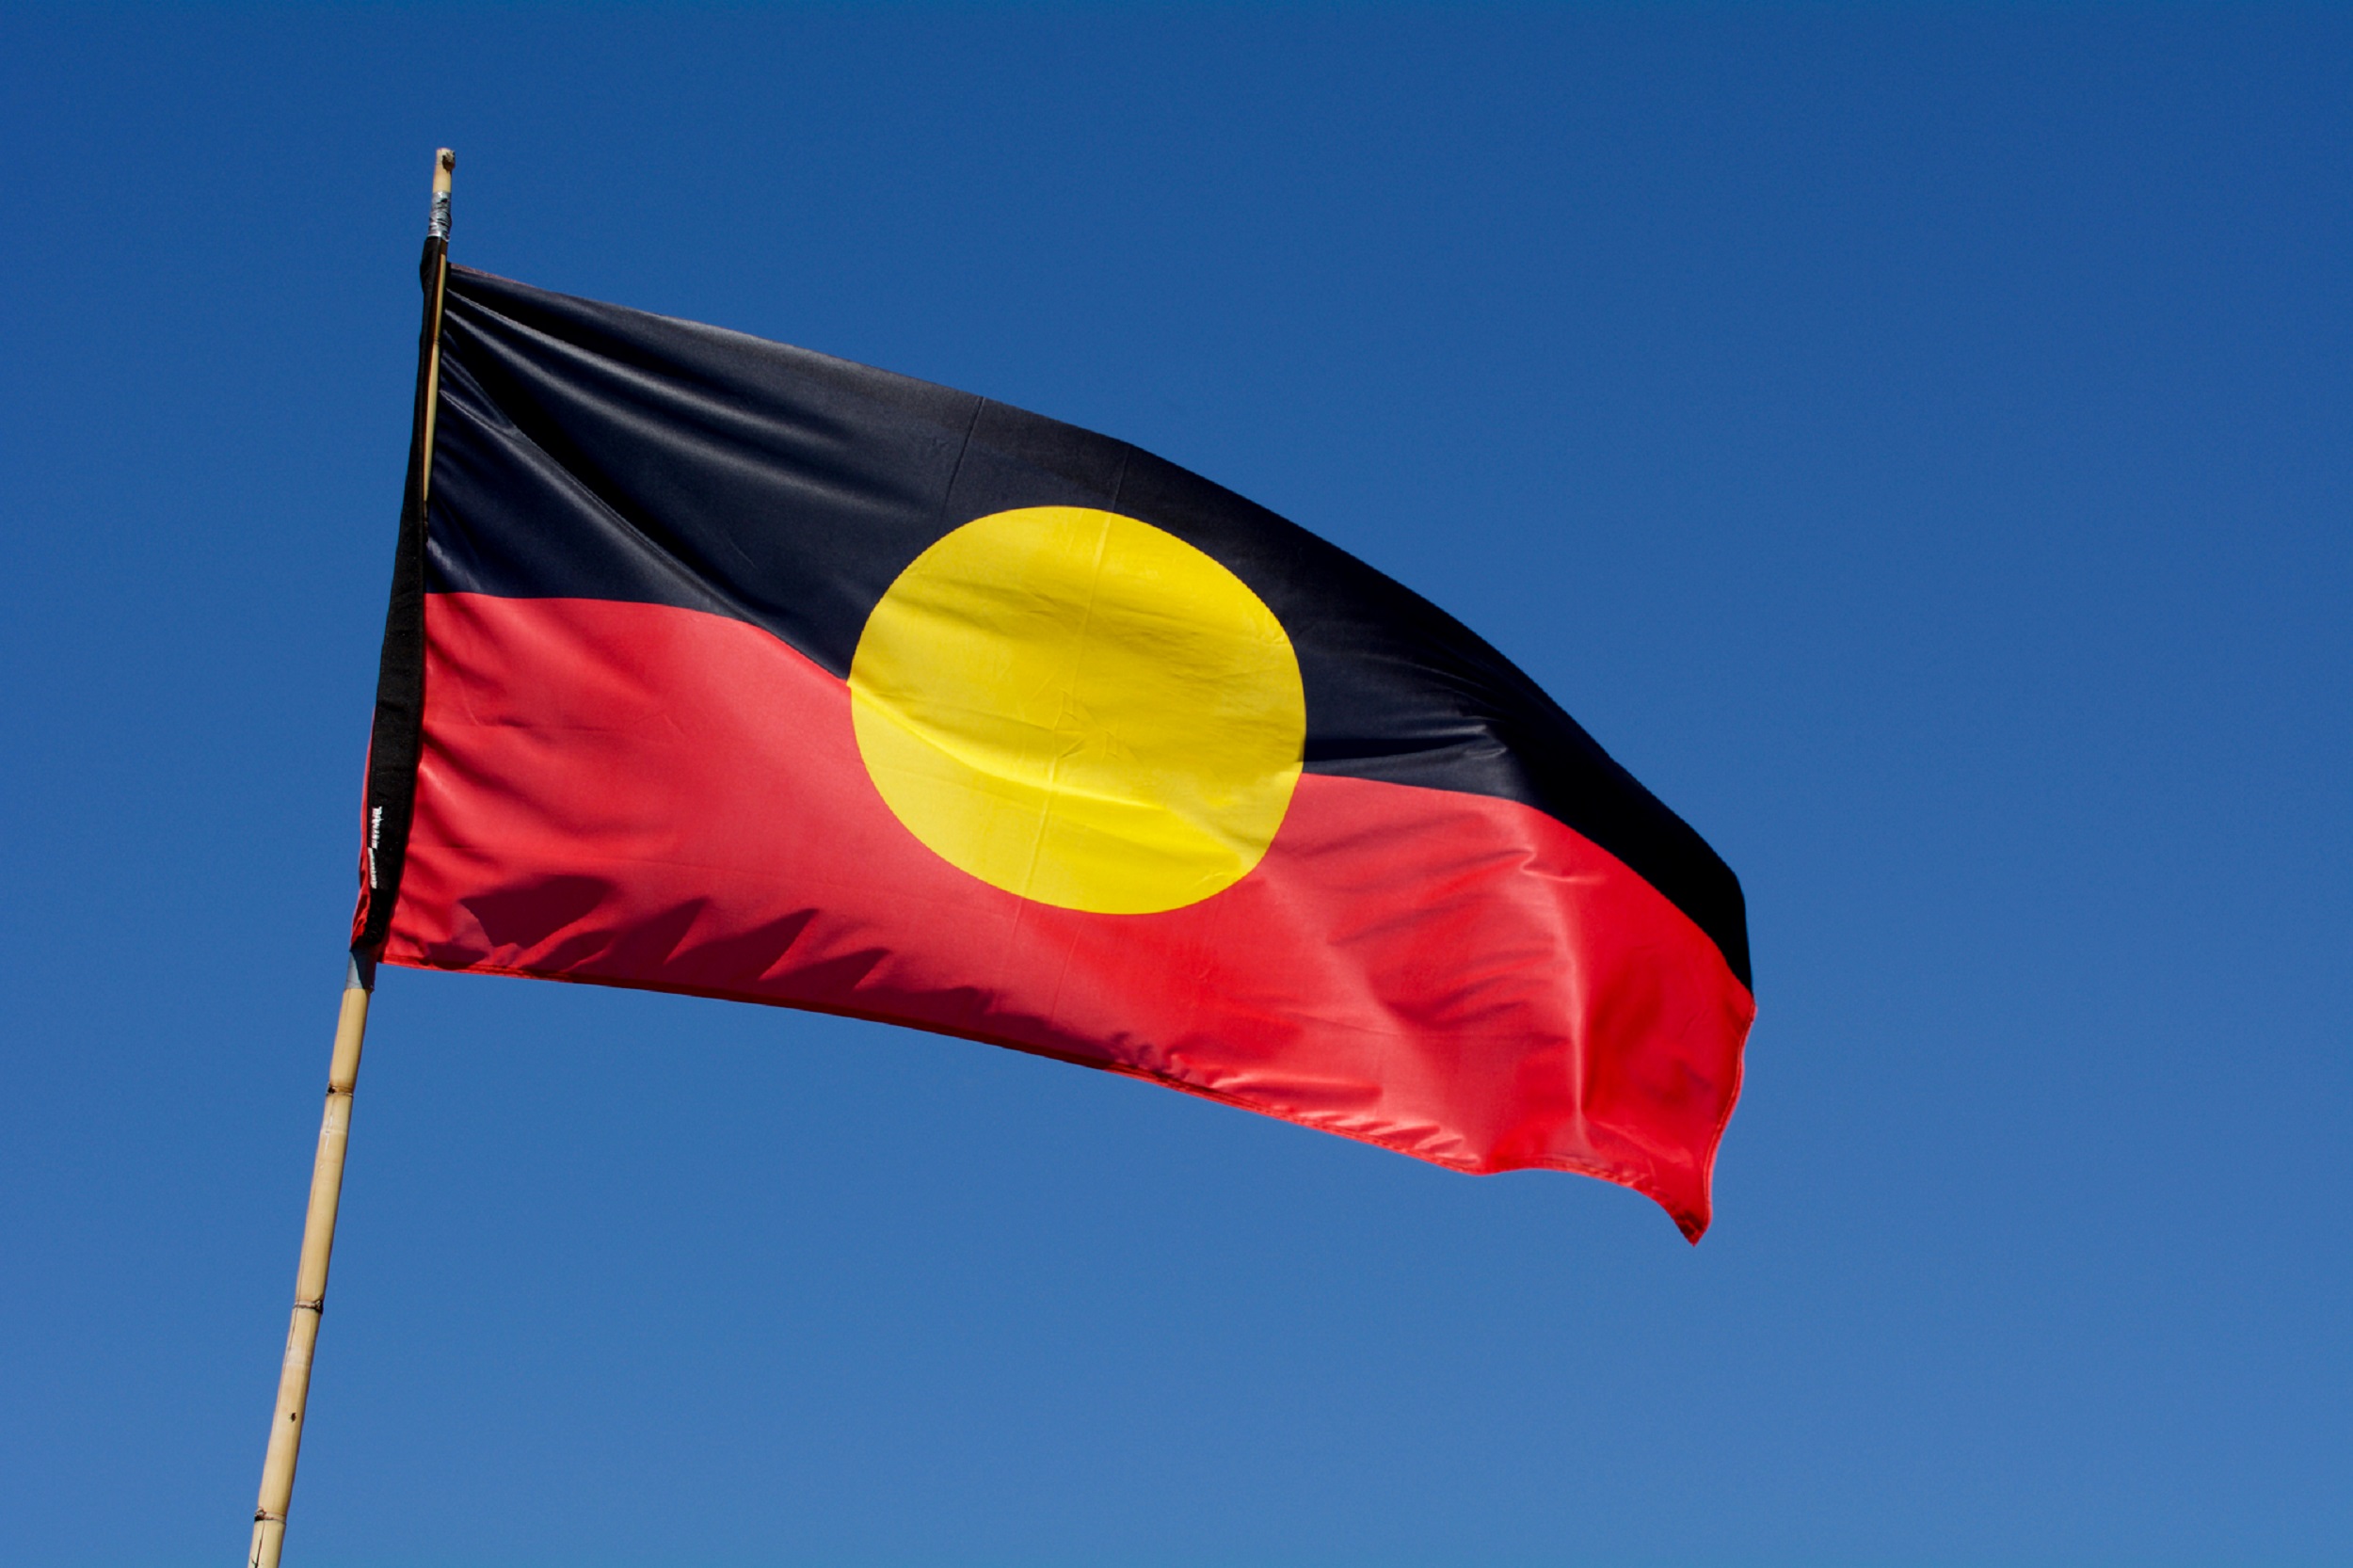 Aboriginal Flag flying in the breeze.